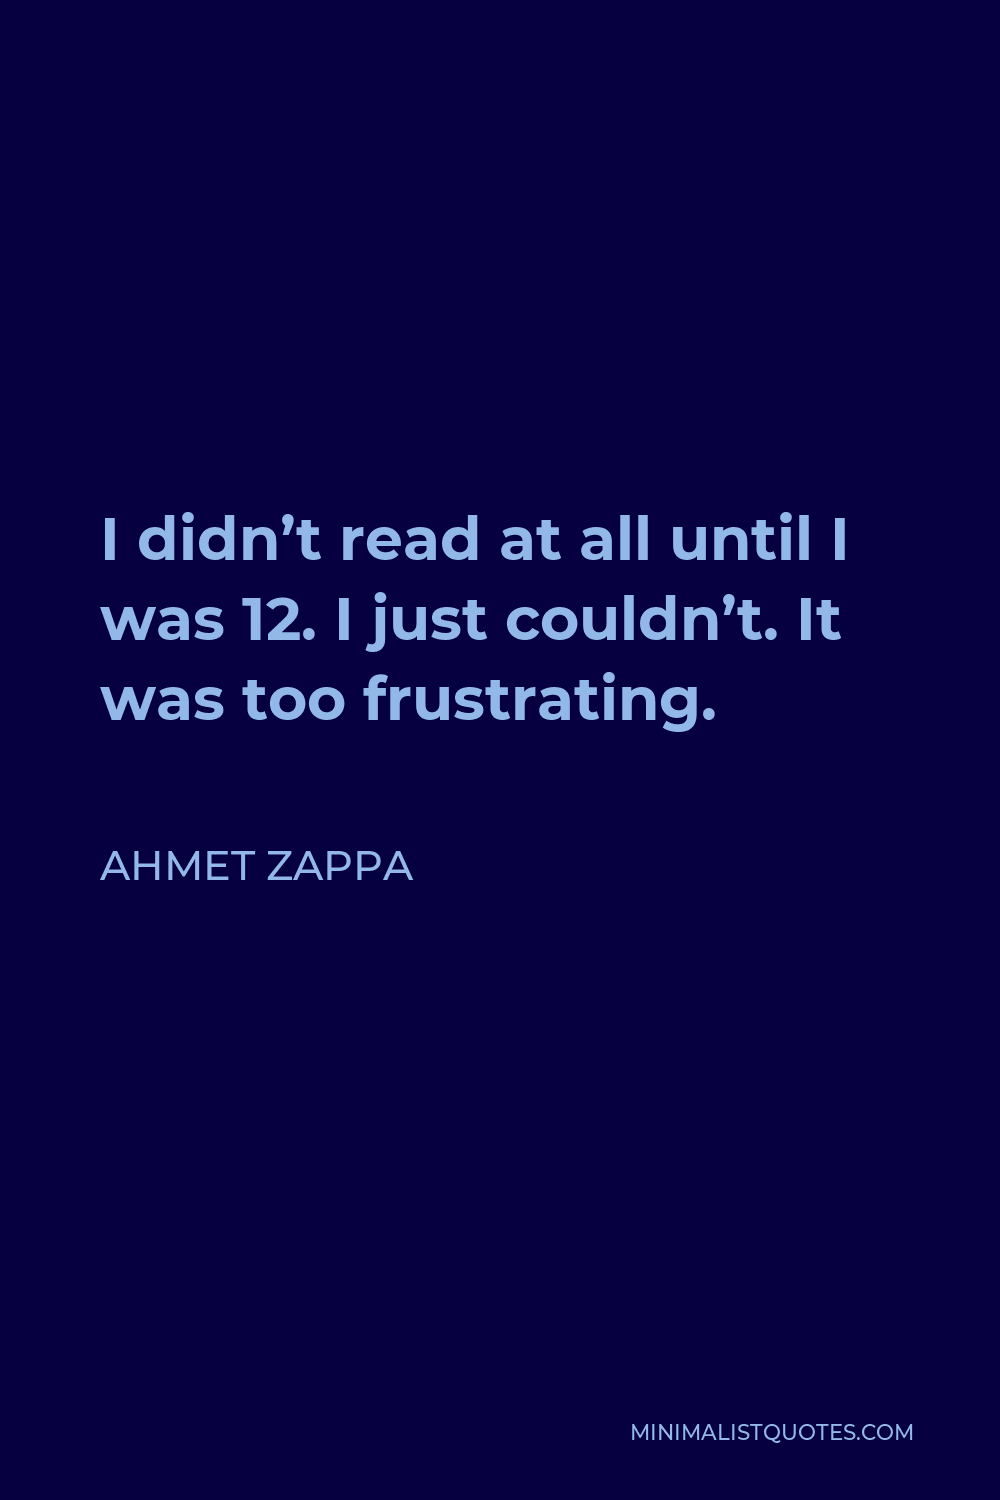 Ahmet Zappa Quote - I didn’t read at all until I was 12. I just couldn’t. It was too frustrating.